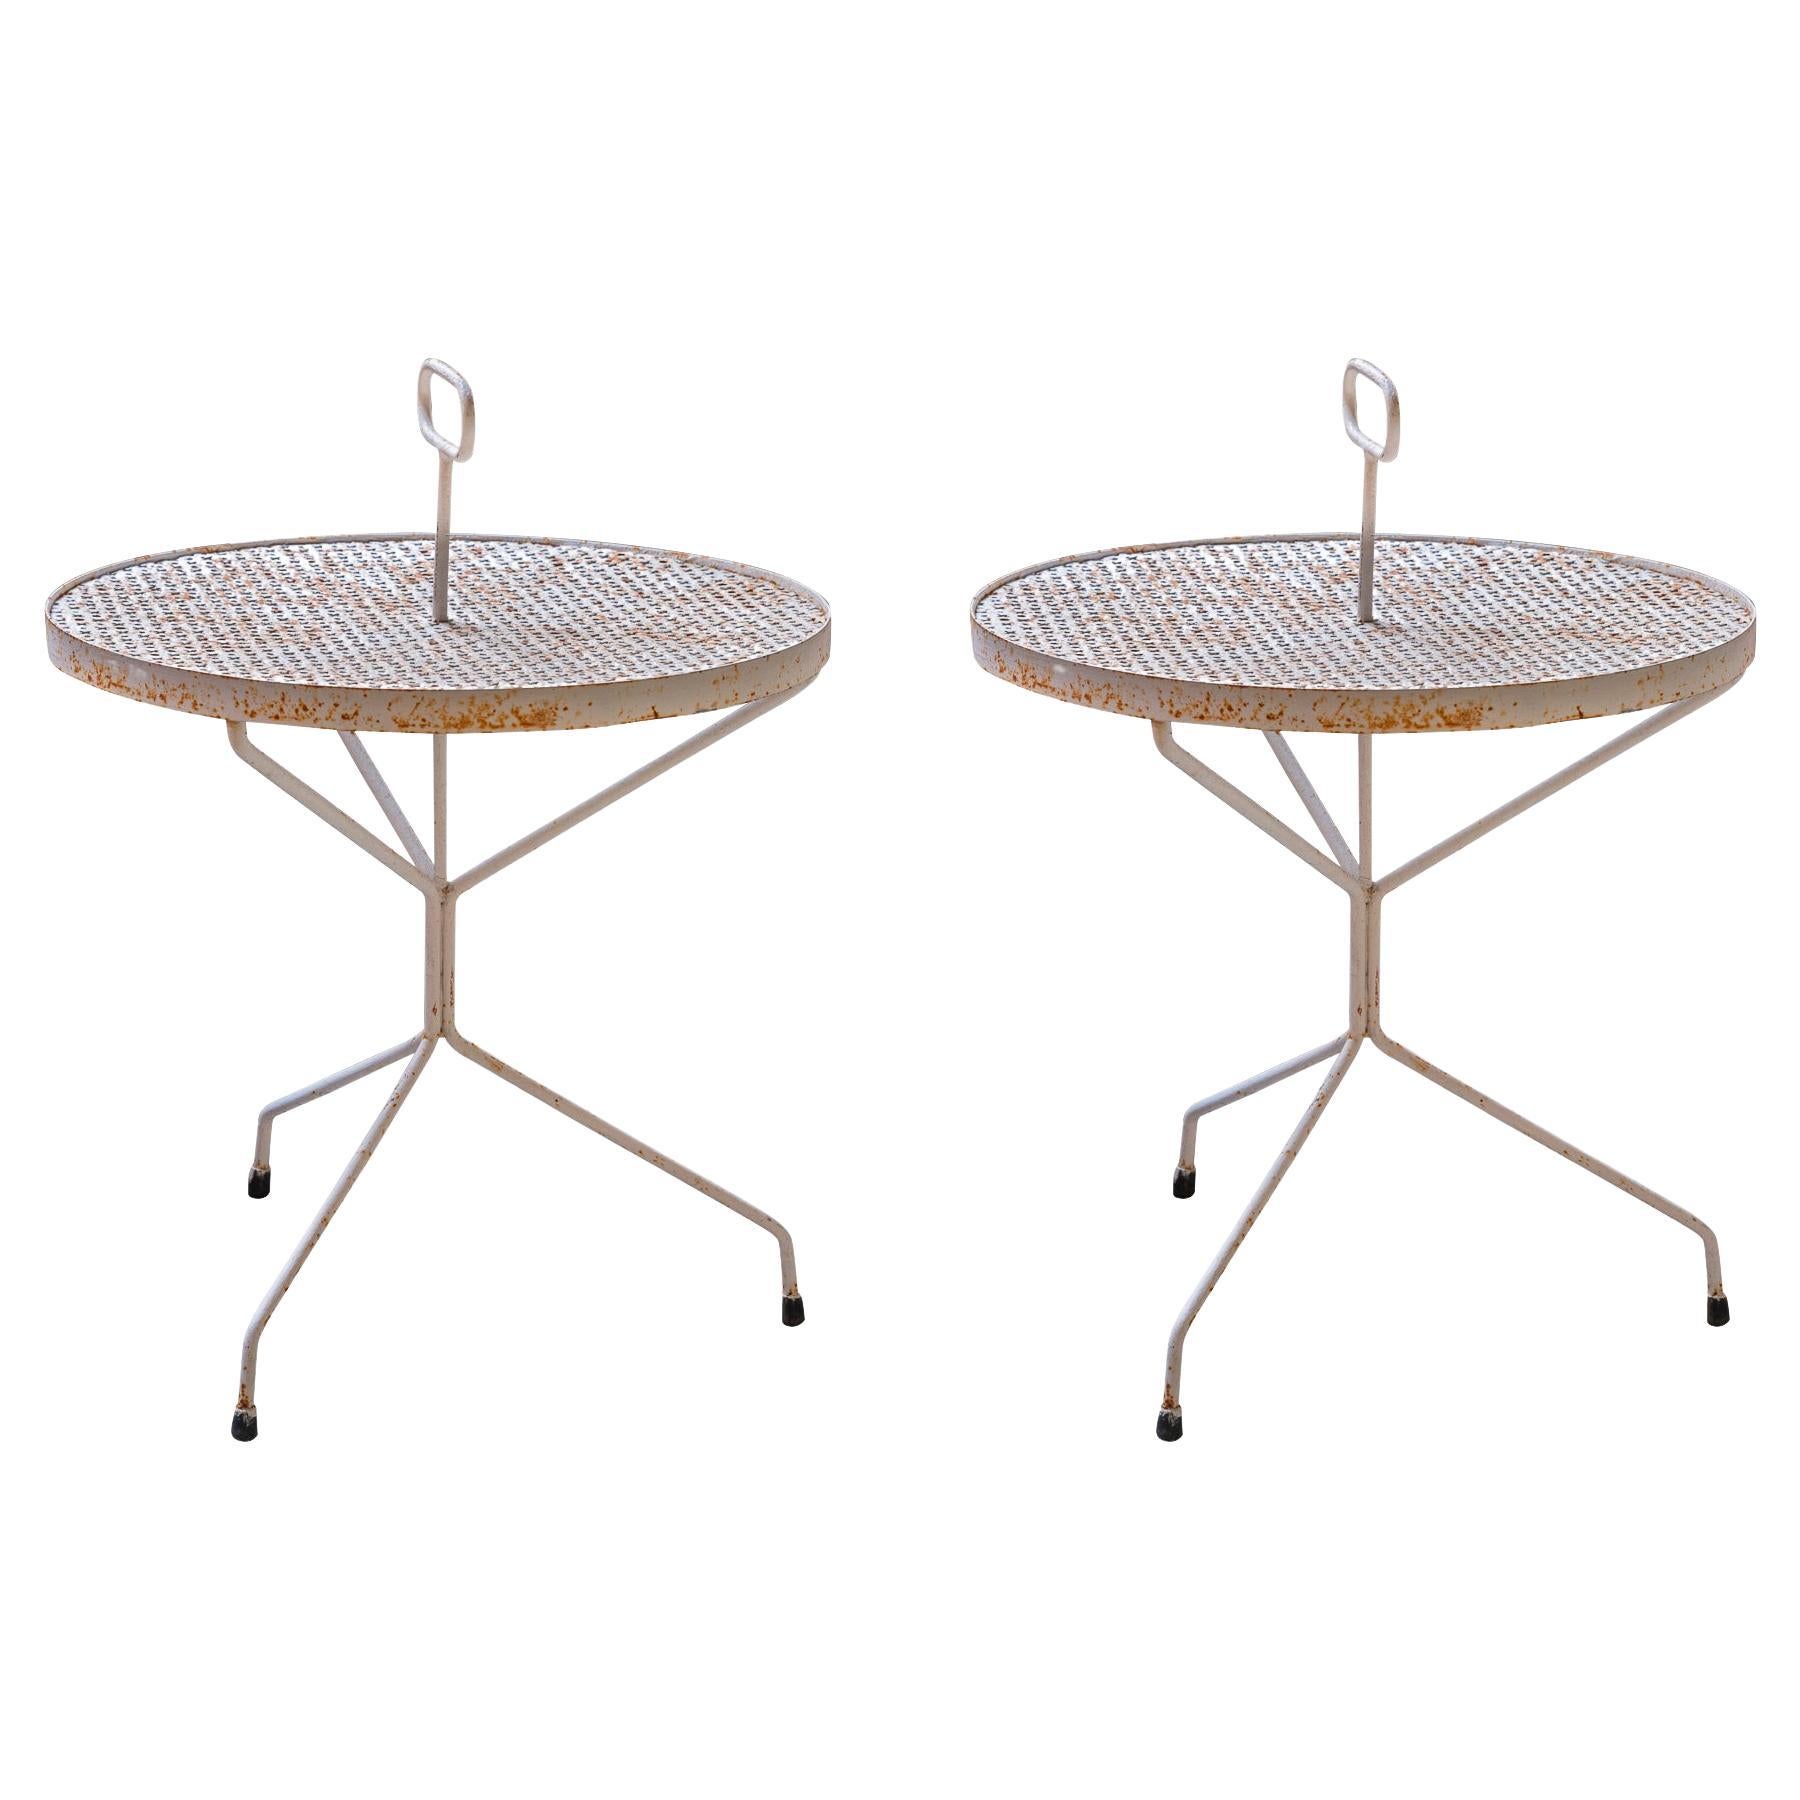 Pair of Small Tables in the Style of Mathieu Matégot, France, circa 1970